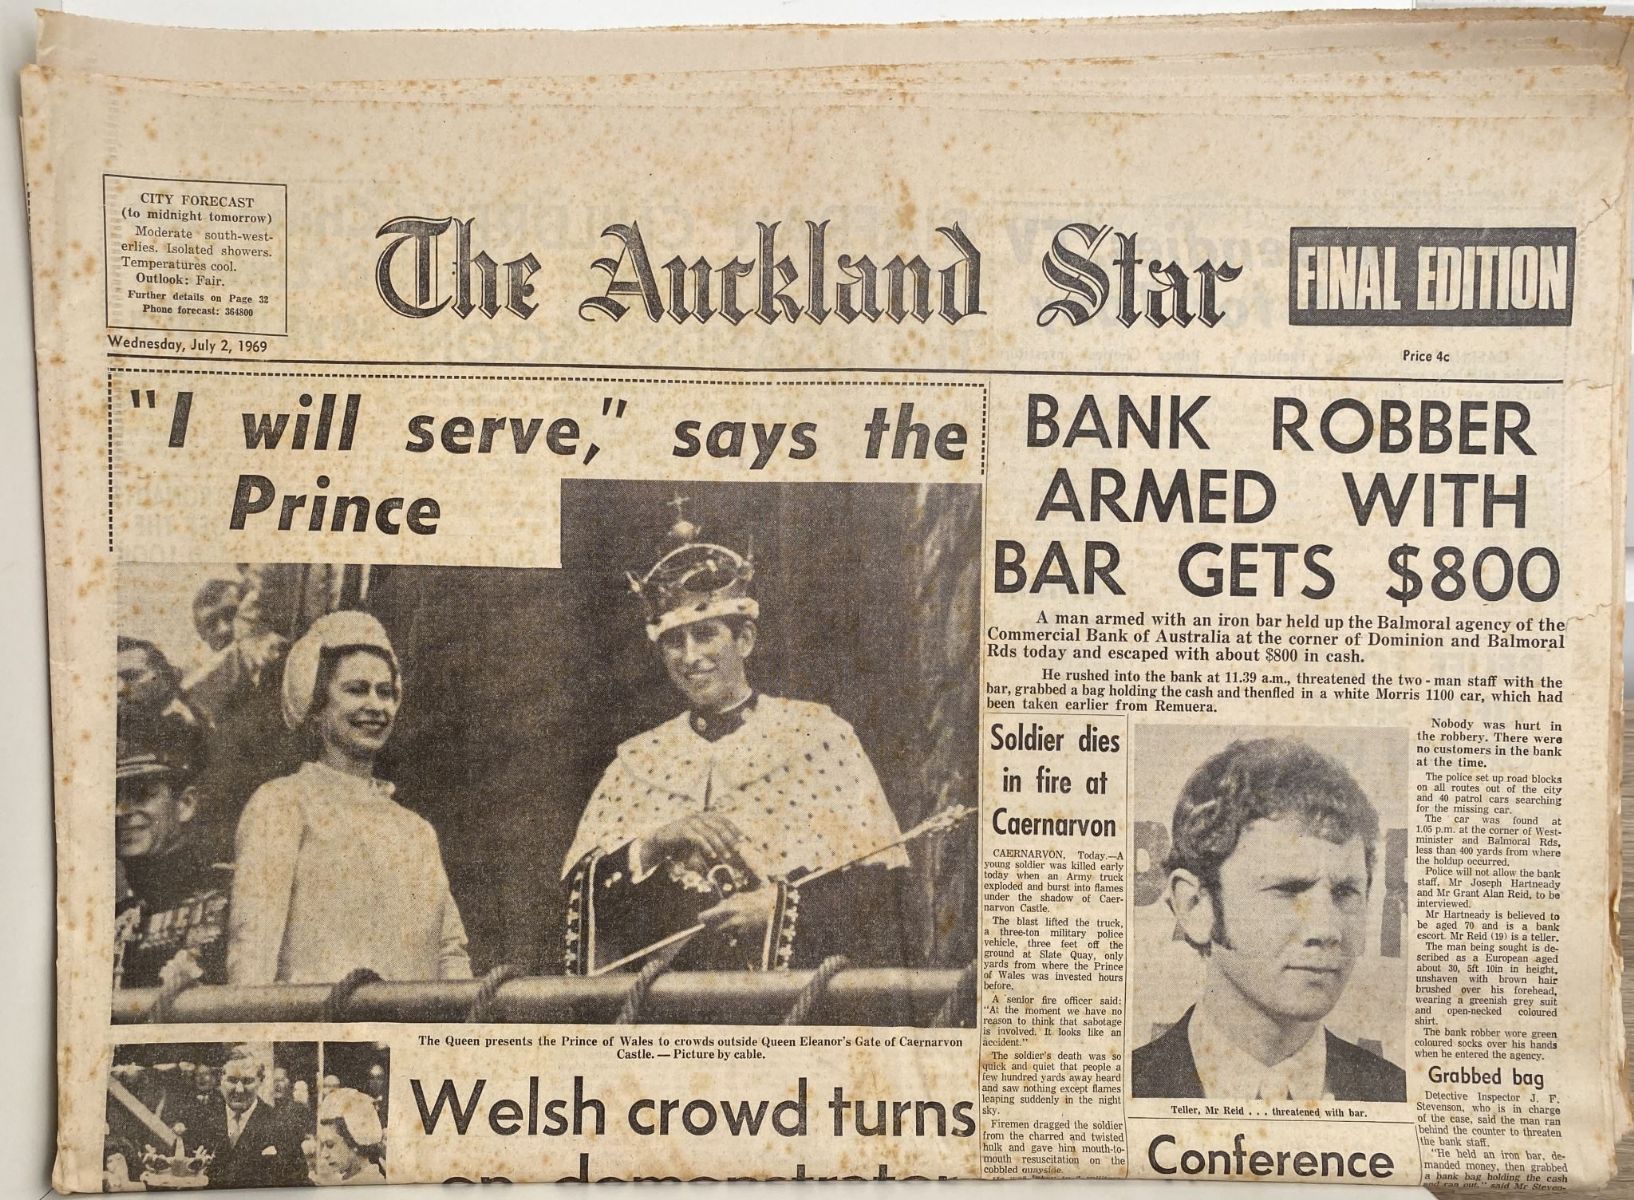 OLD NEWSPAPER: The Auckland Star, 2nd July 1969 - Prince of Wales crowned